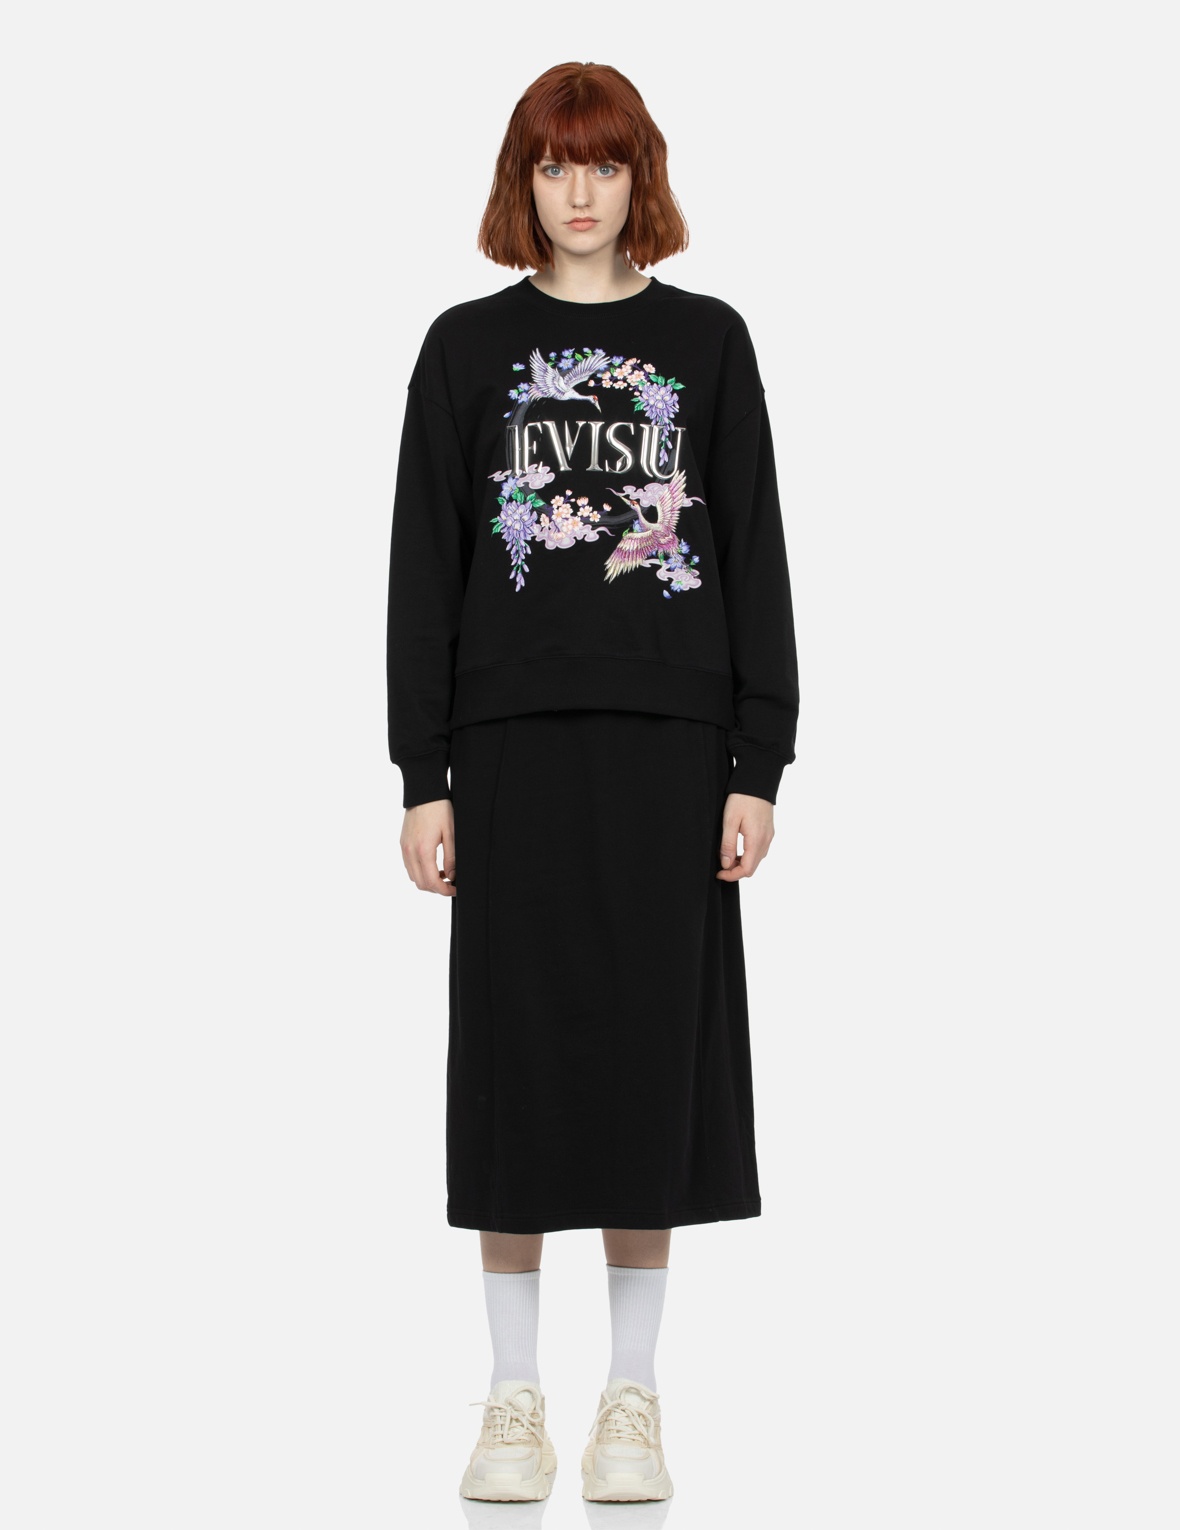 CRANES AND FLORAL EMBROIDERY WITH LOGO PRINT OVERSIZED SWEATSHIRT - 5